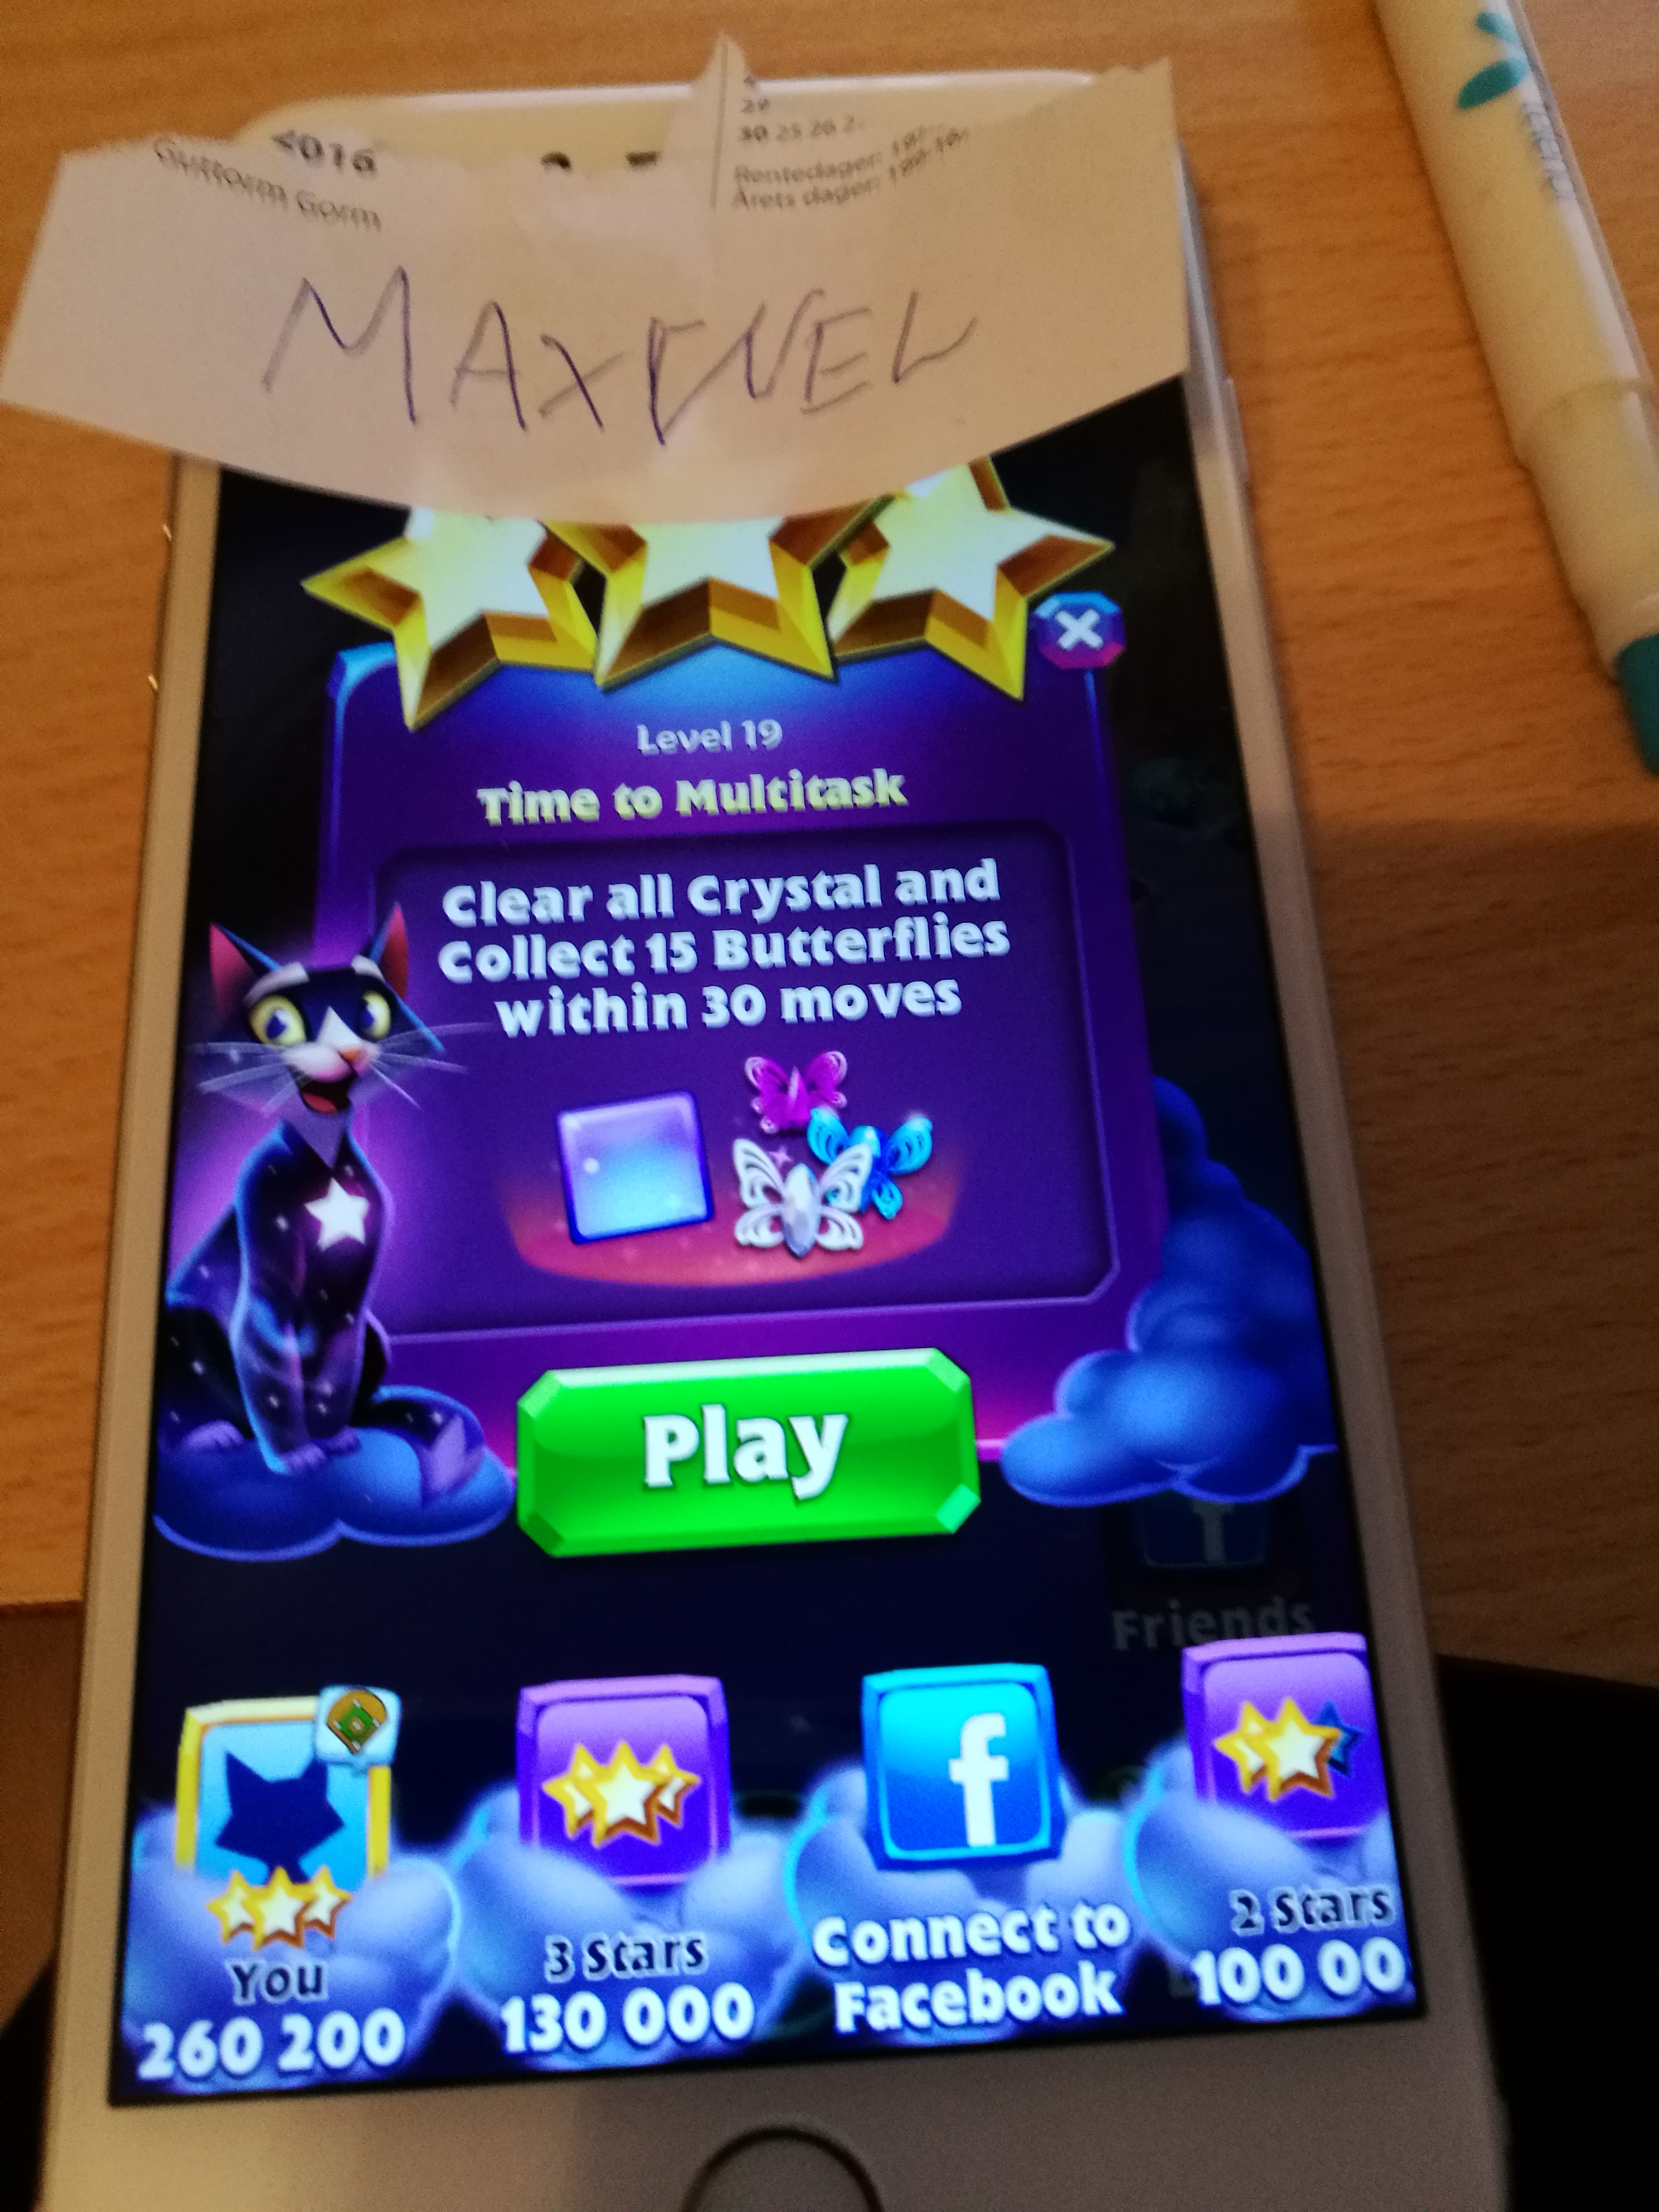 Maxwel: Bejeweled Stars: Level 19 - Time to Multitask (iOS) 260,200 points on 2016-08-24 15:33:43